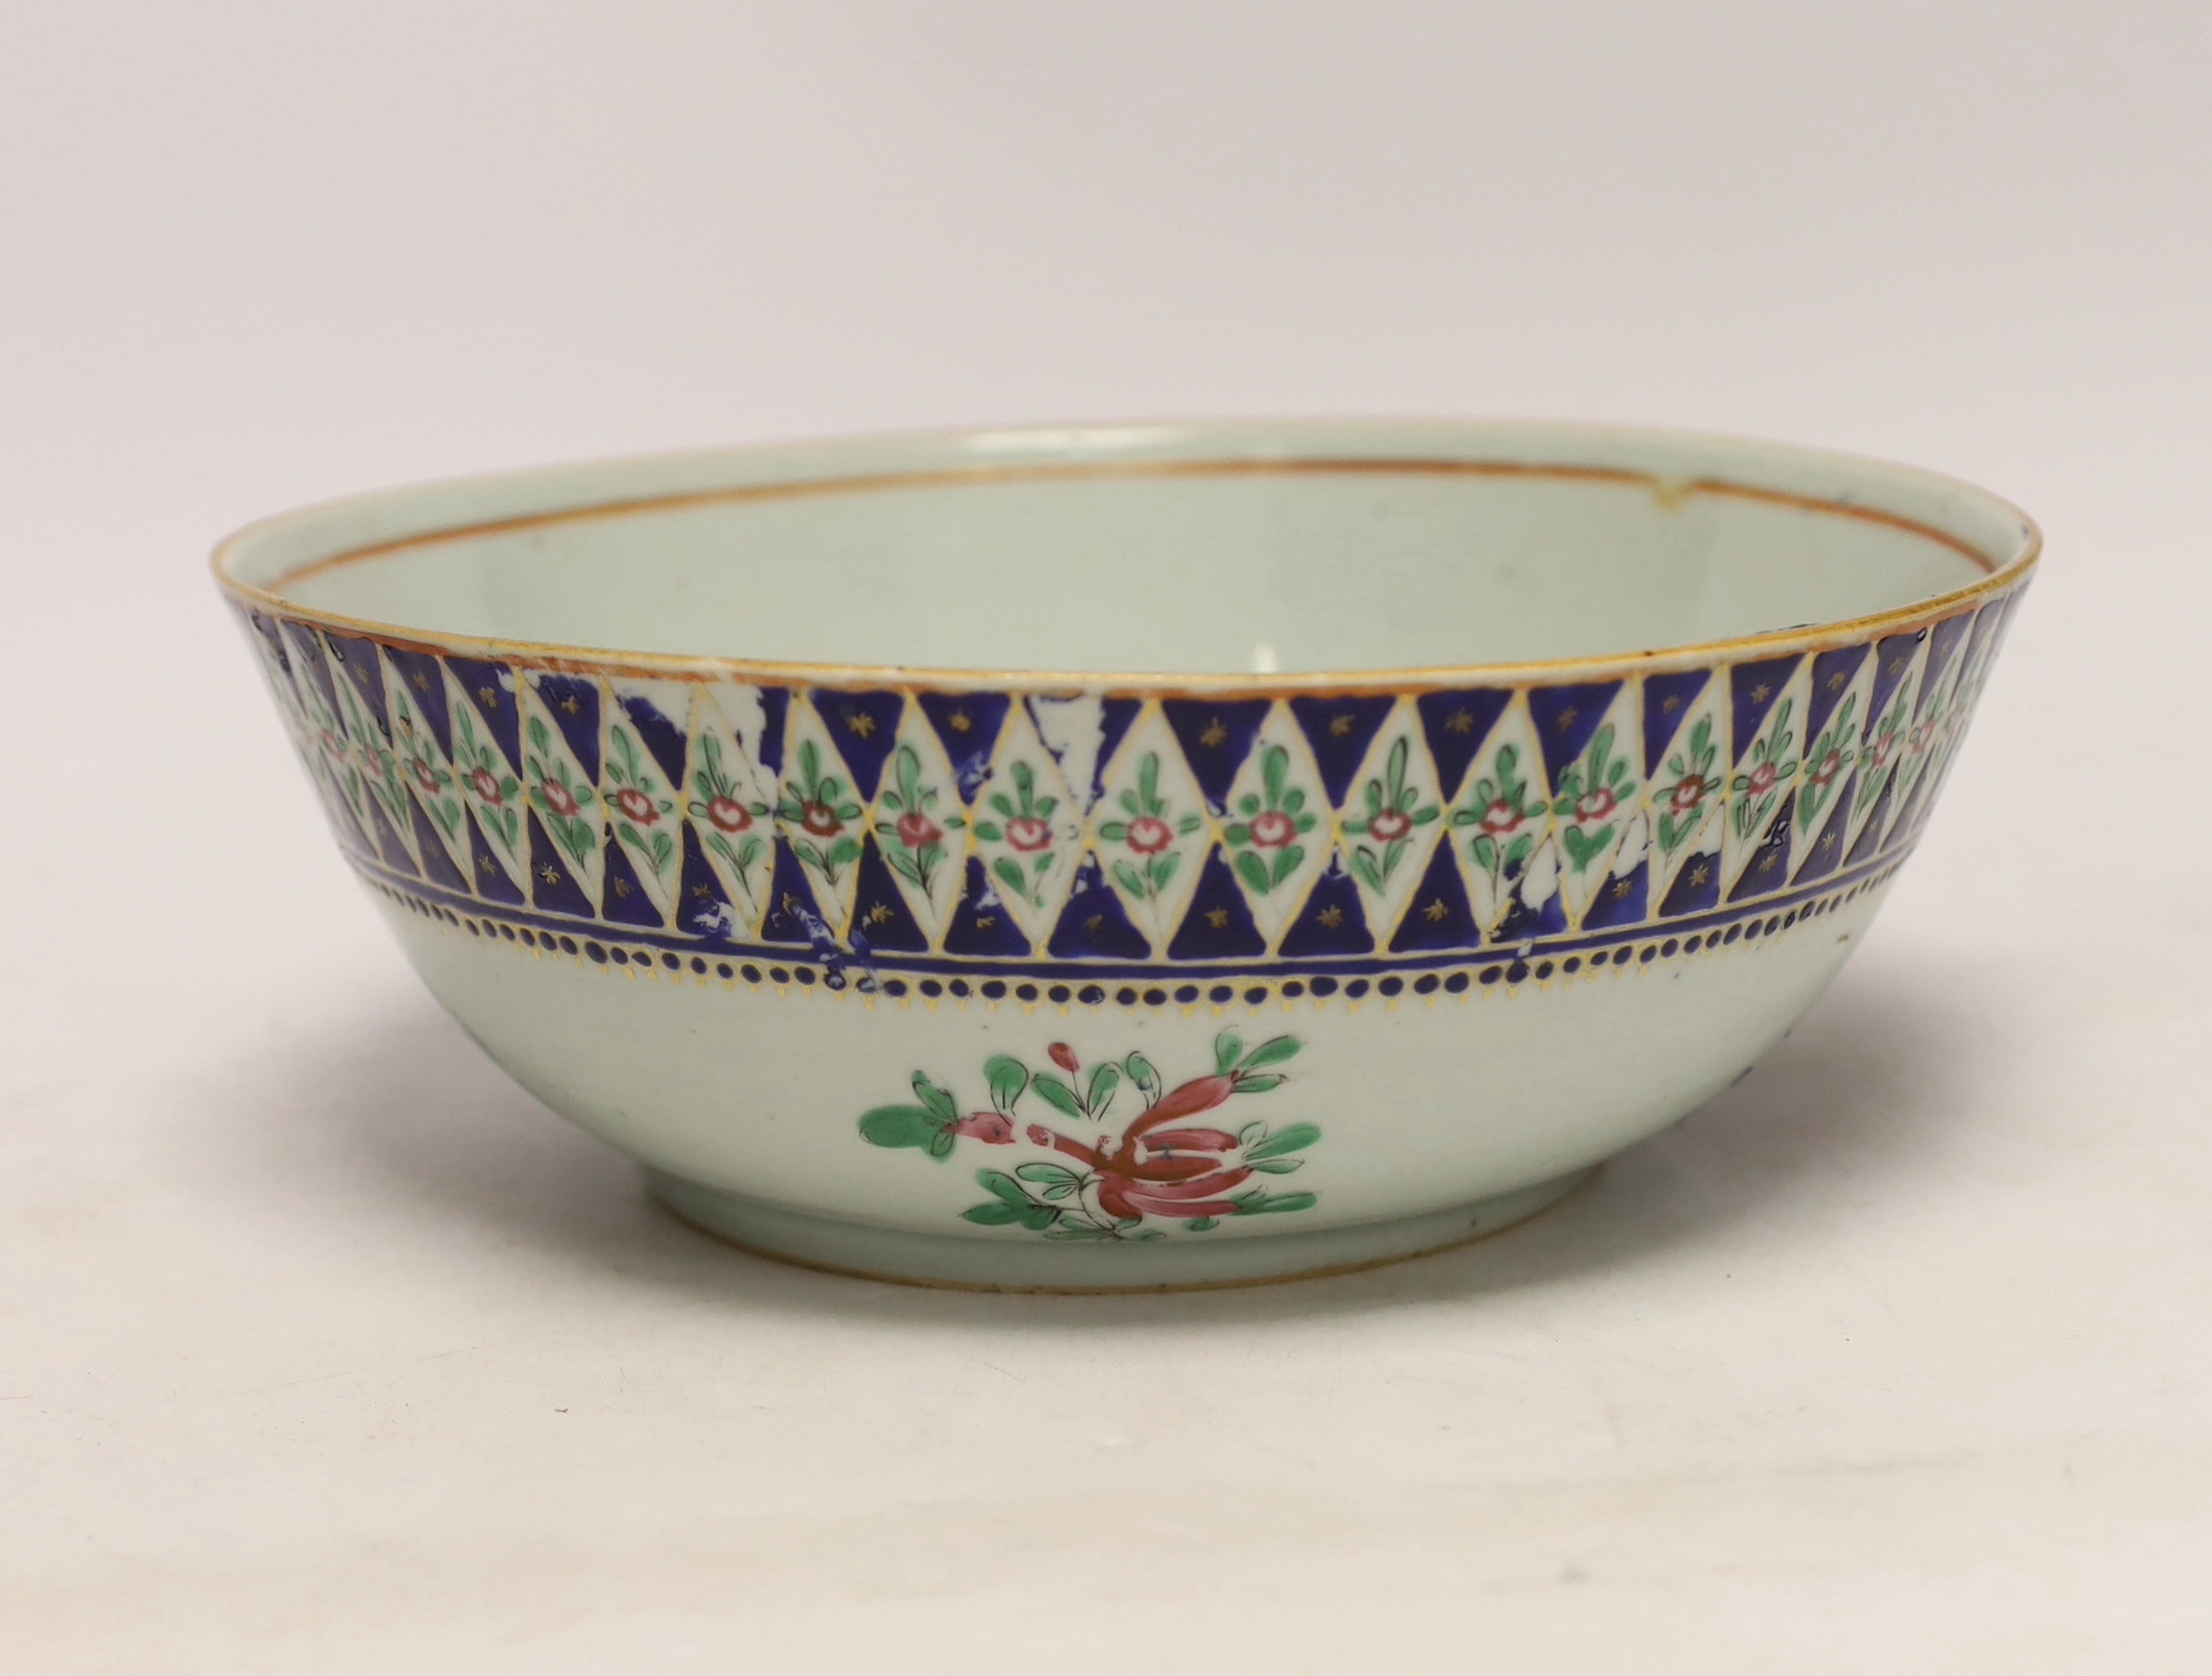 A large Chinese famille rose bowl, early 19th century, probably made for the Indian market, 26cm in diameter